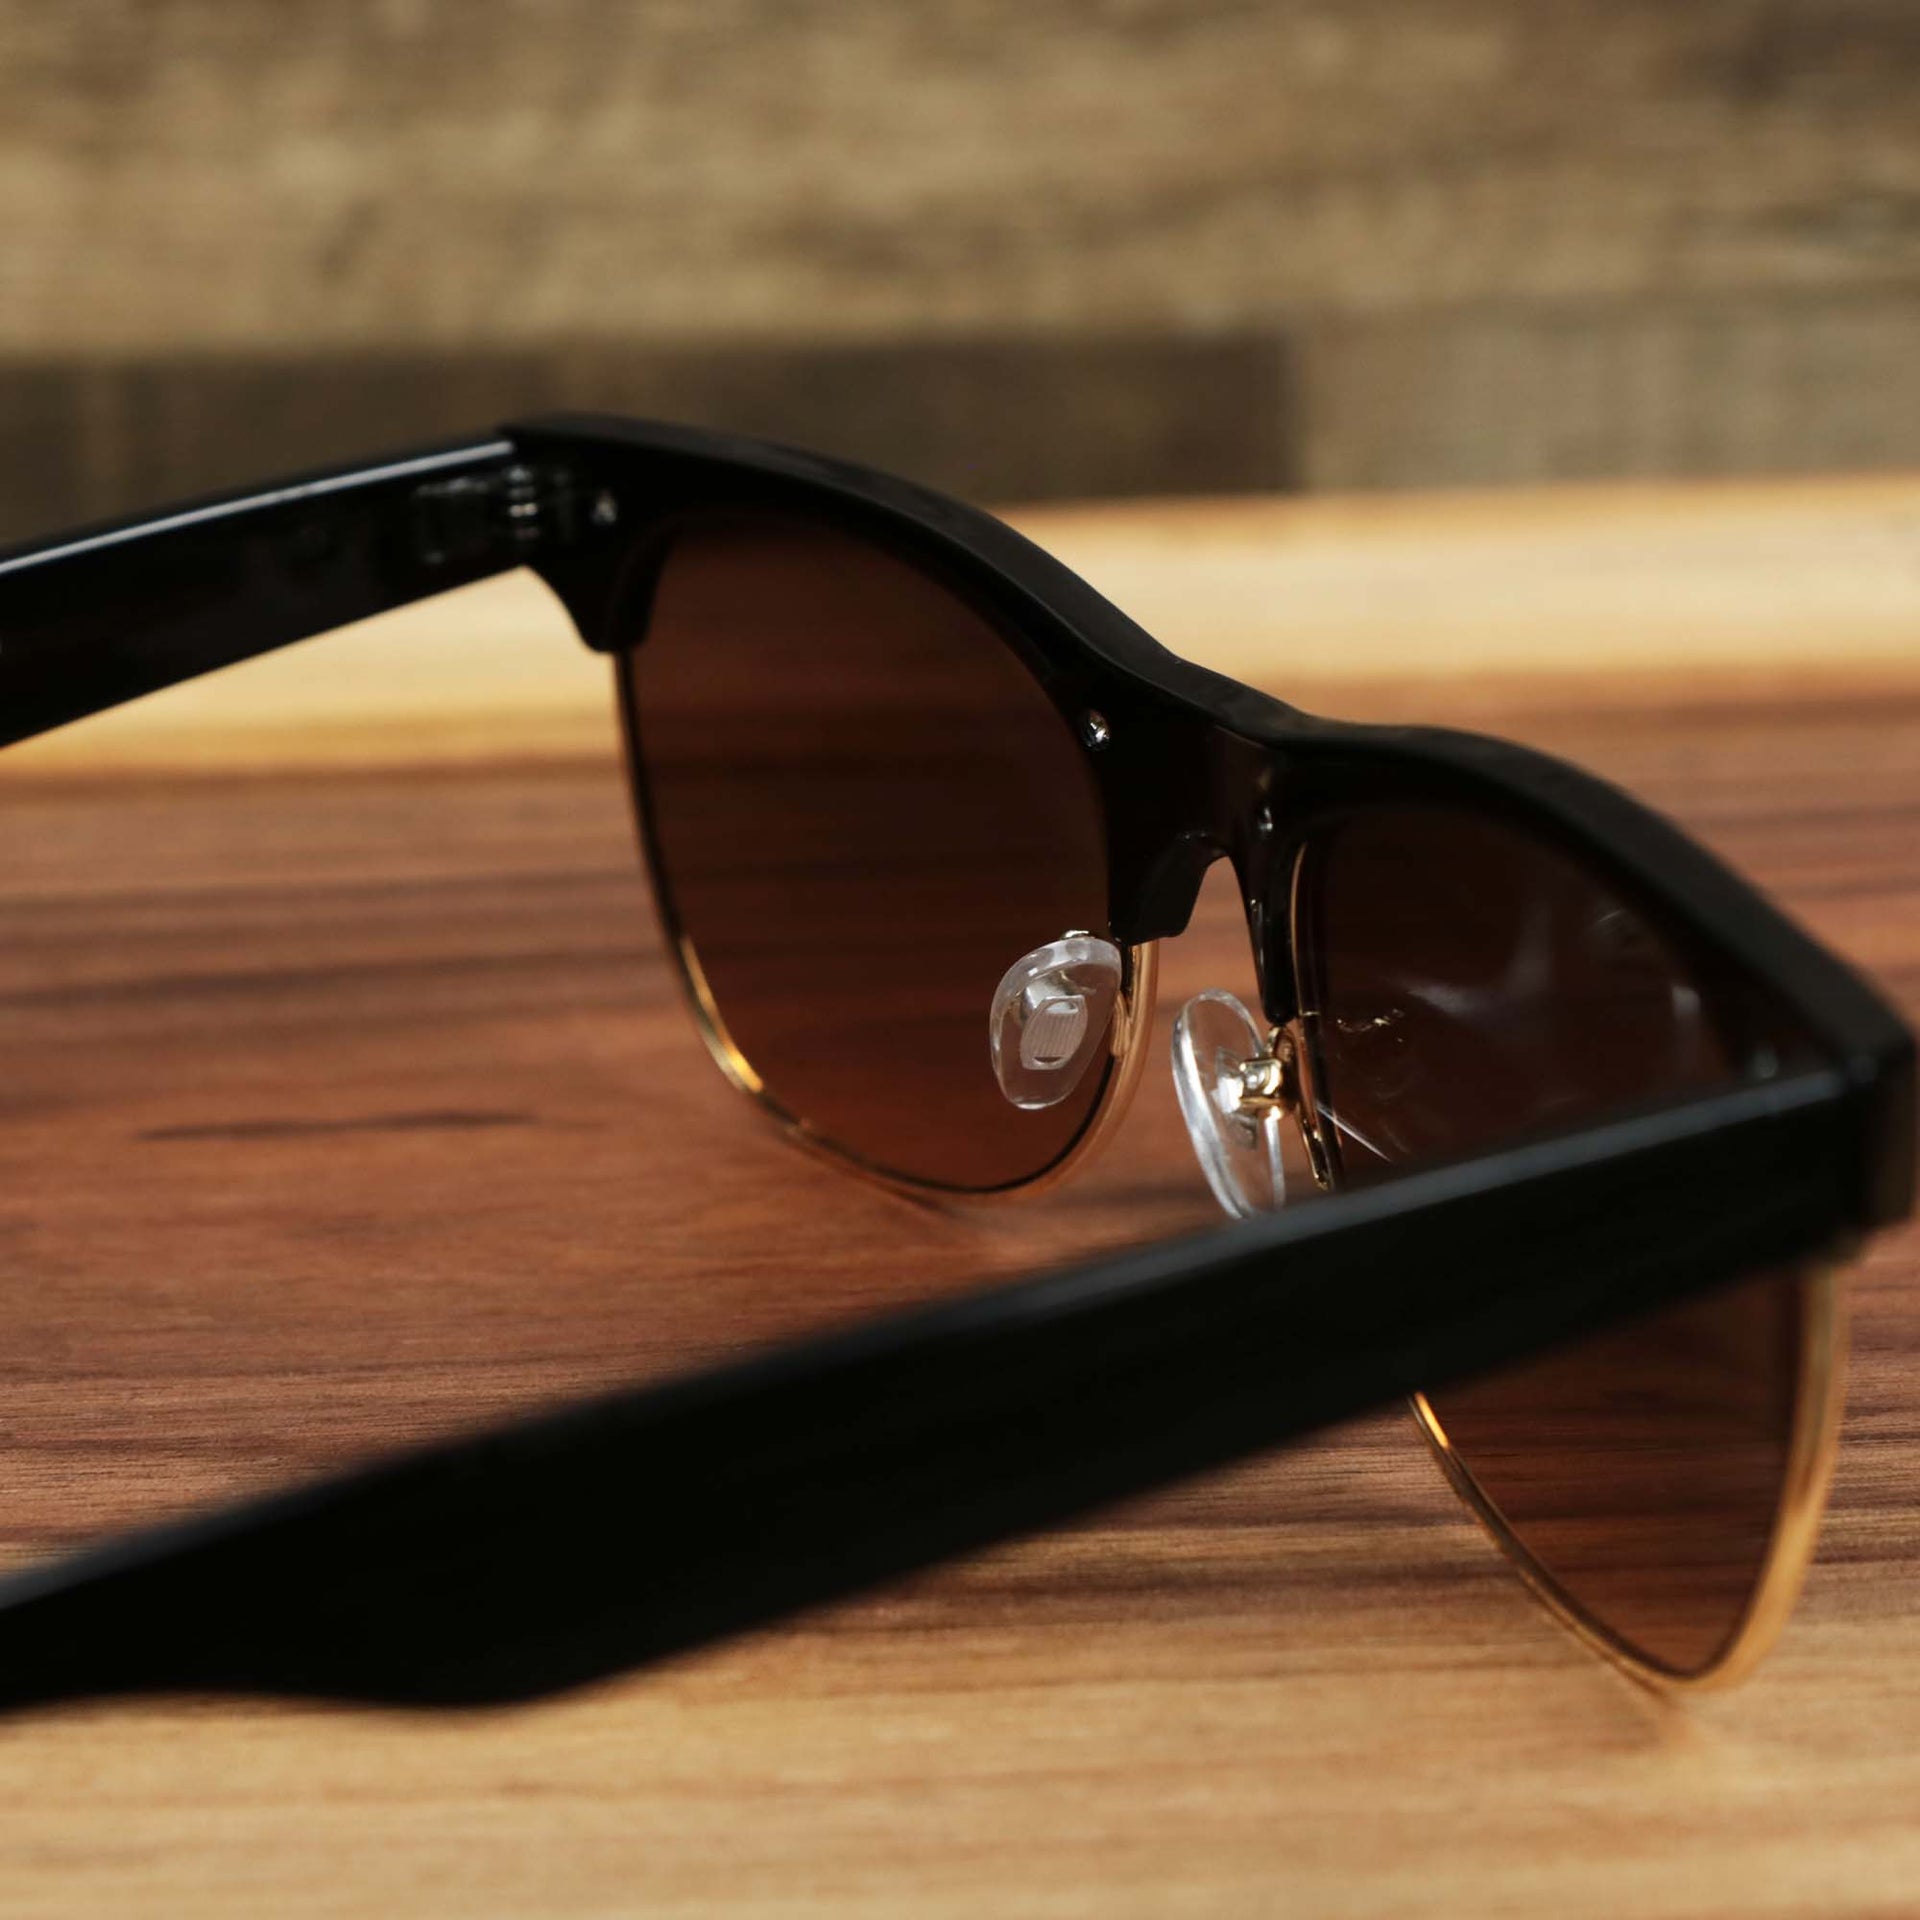 The inside of the Thick Top and Metal Bottom Frame Brown Lens Sunglasses with Black Frame